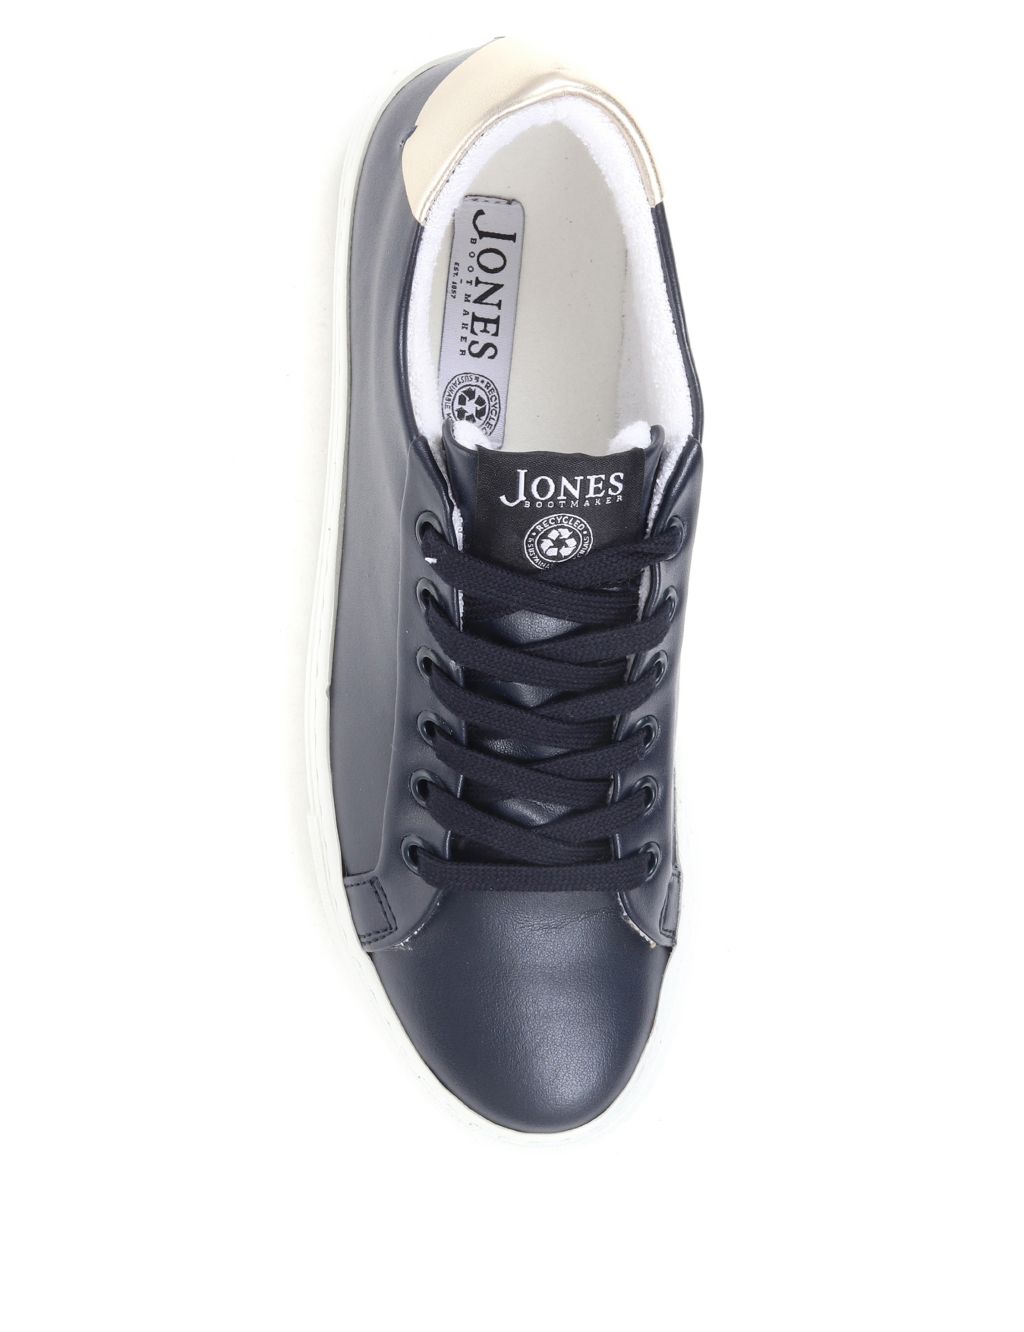 Lace Up Trainers image 3